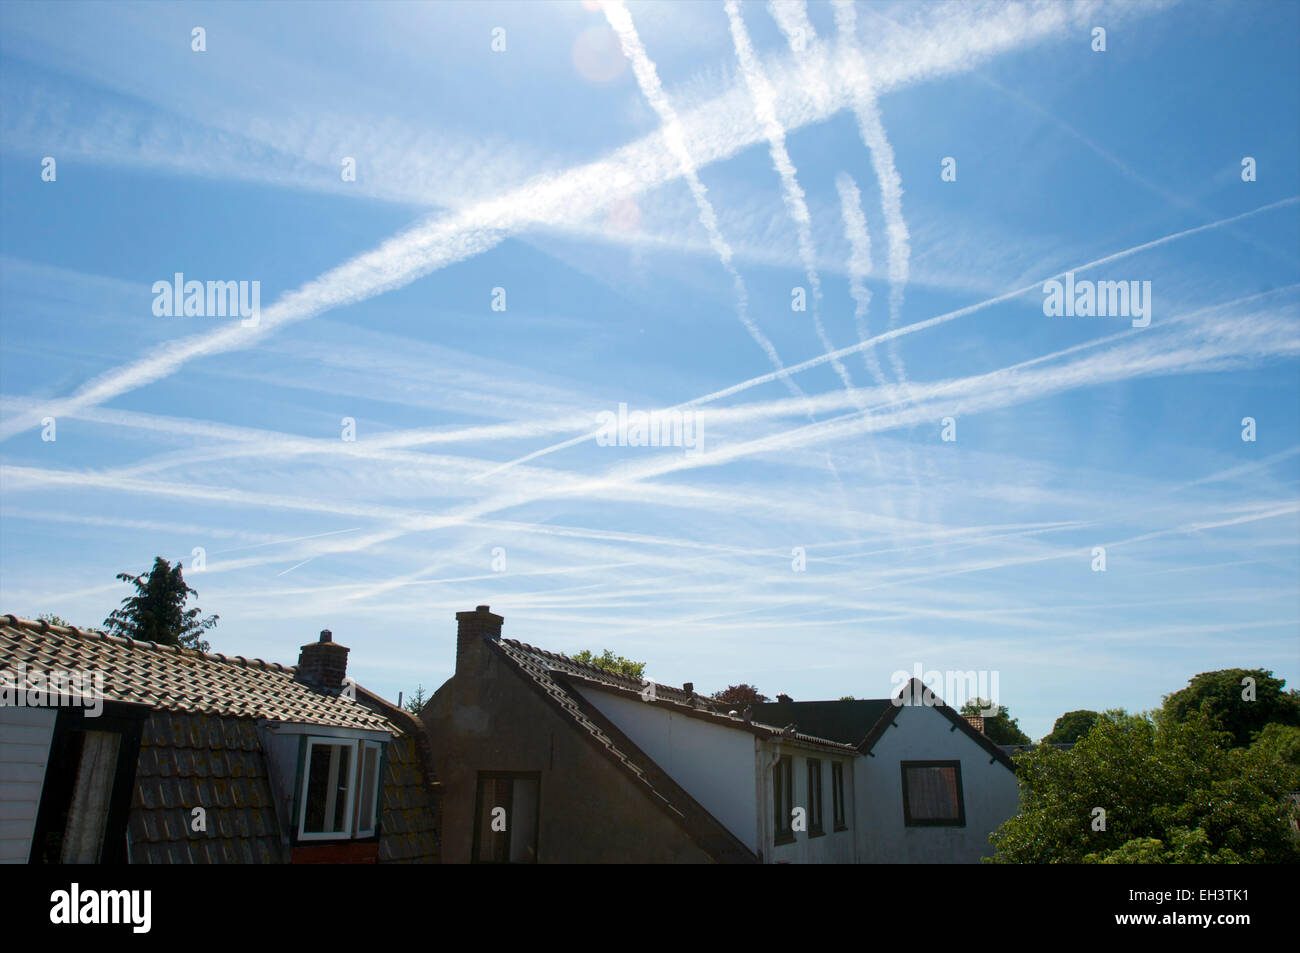 Chemtrails and contrails in a blue sky above houses Stock Photo